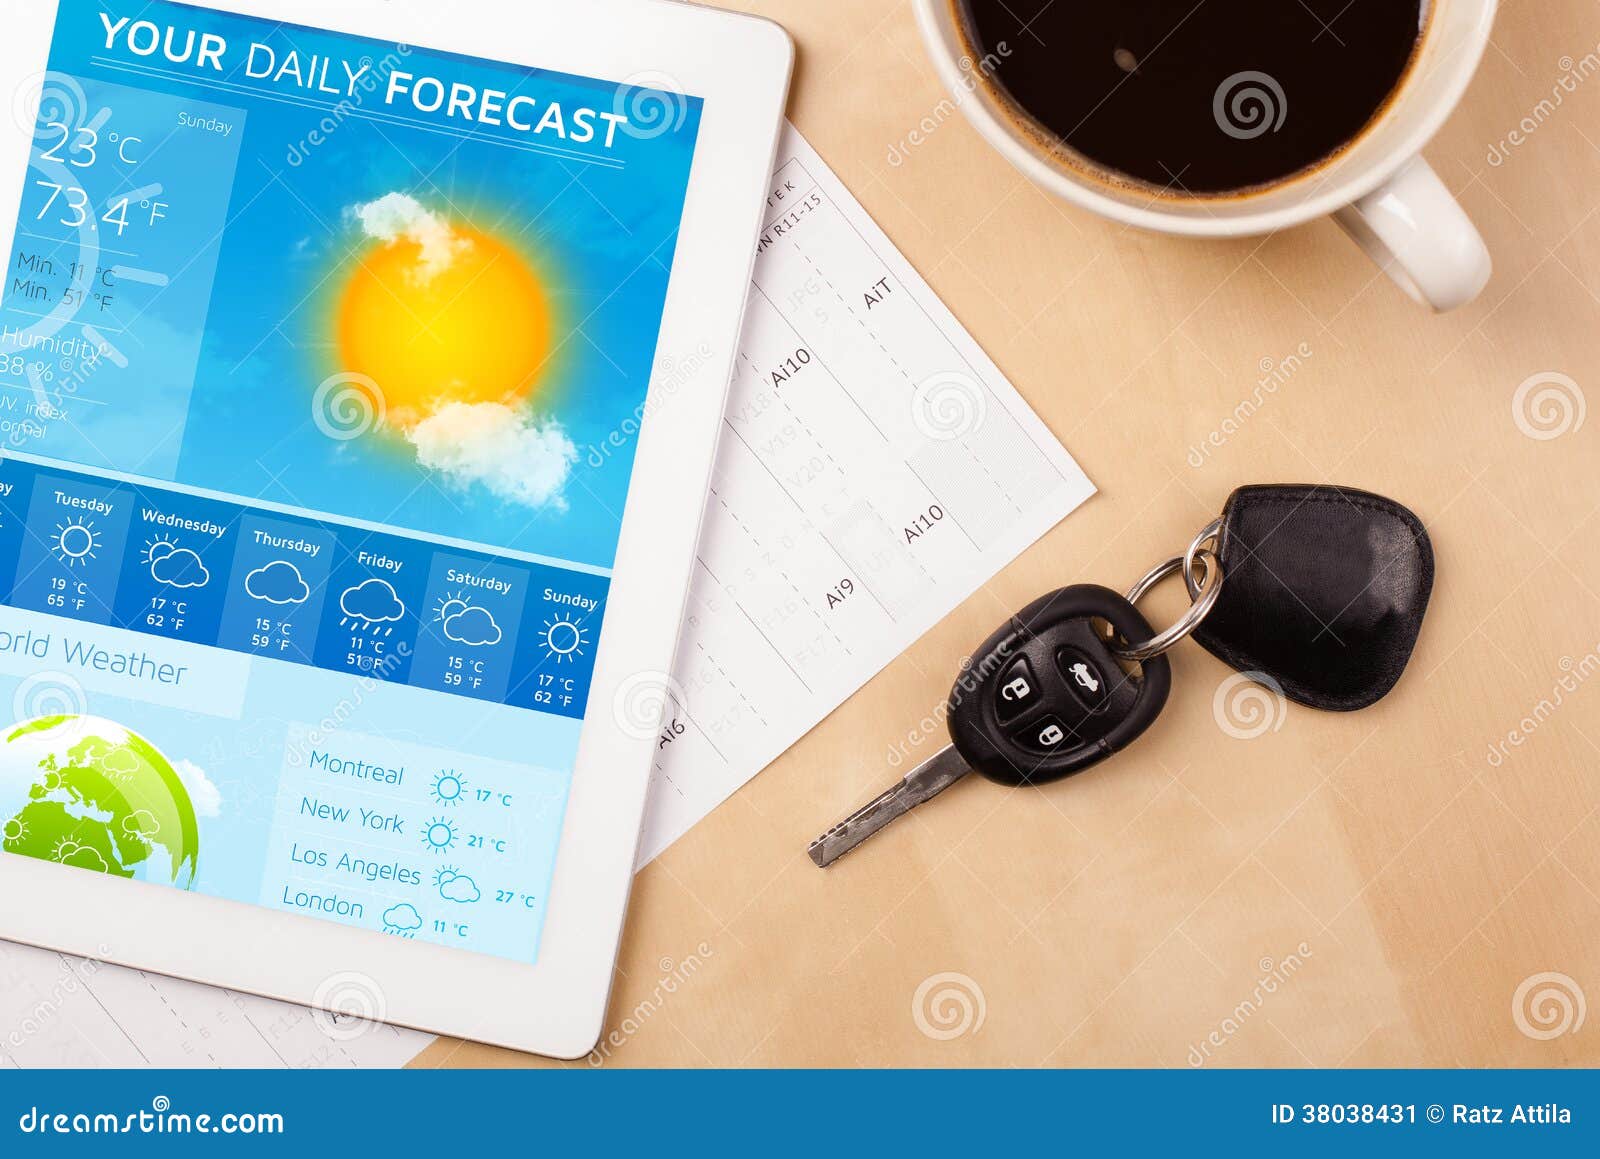 tablet pc showing weather forecast on screen with a cup of coffee on a desk